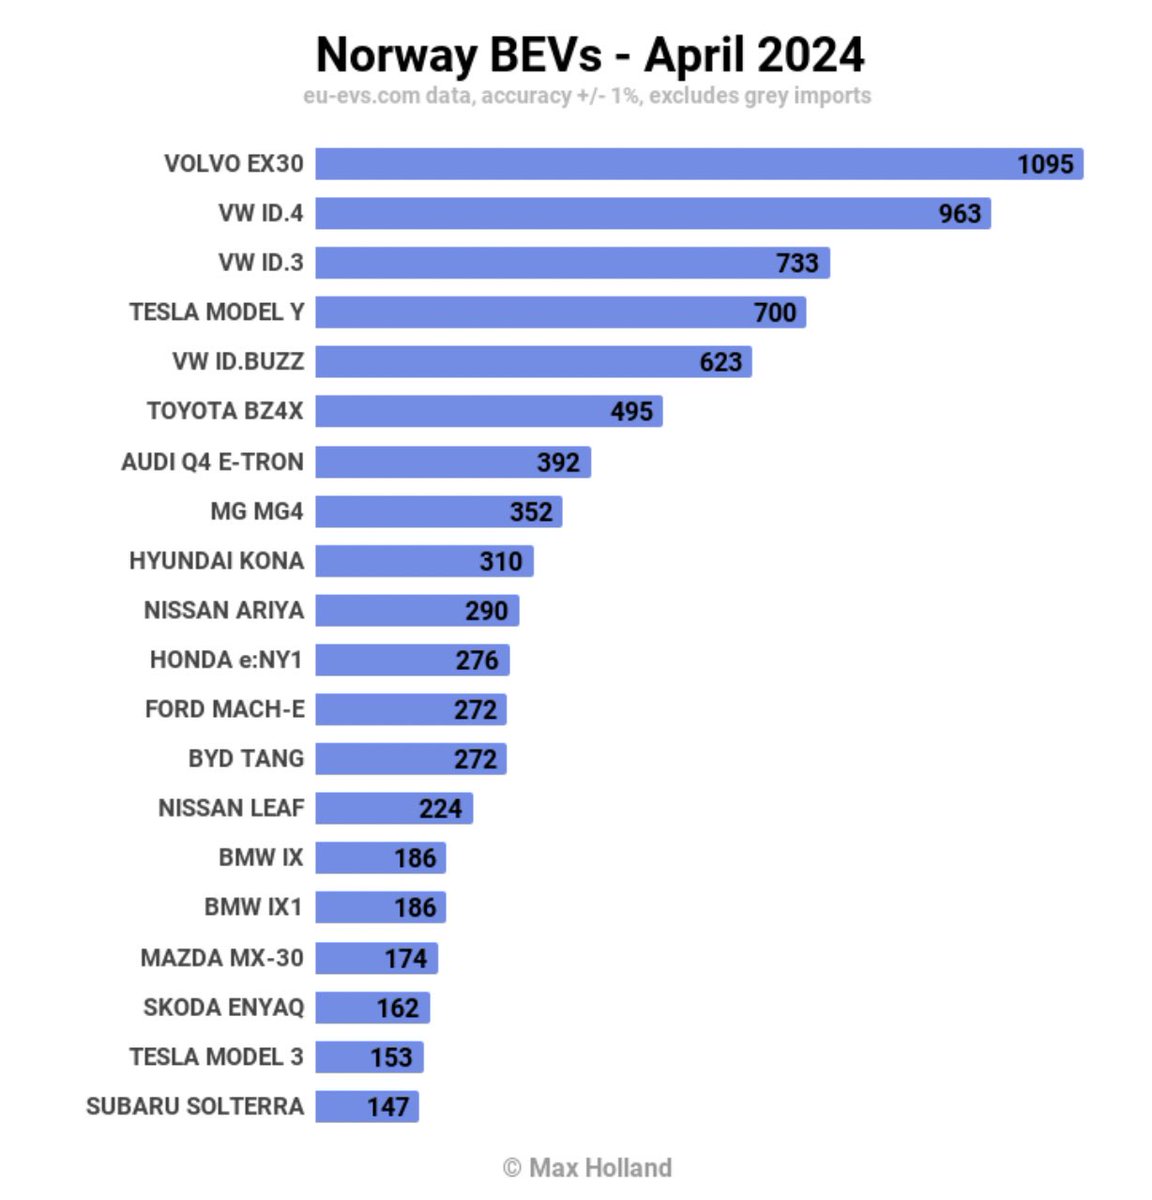 Tesla got crushed by Volvo and VW in EV sales in Norway in April 2024; Volvo EX30 was best selling BEV (Volvo is owned by China’s Geely, which owns Polestar, Lotus, Aston Martin, London cabs) but VW took overall sales 👑

VW (Audi, Skoda, VW): 2850+
Geely (Volvo): 1095
Tesla: 853